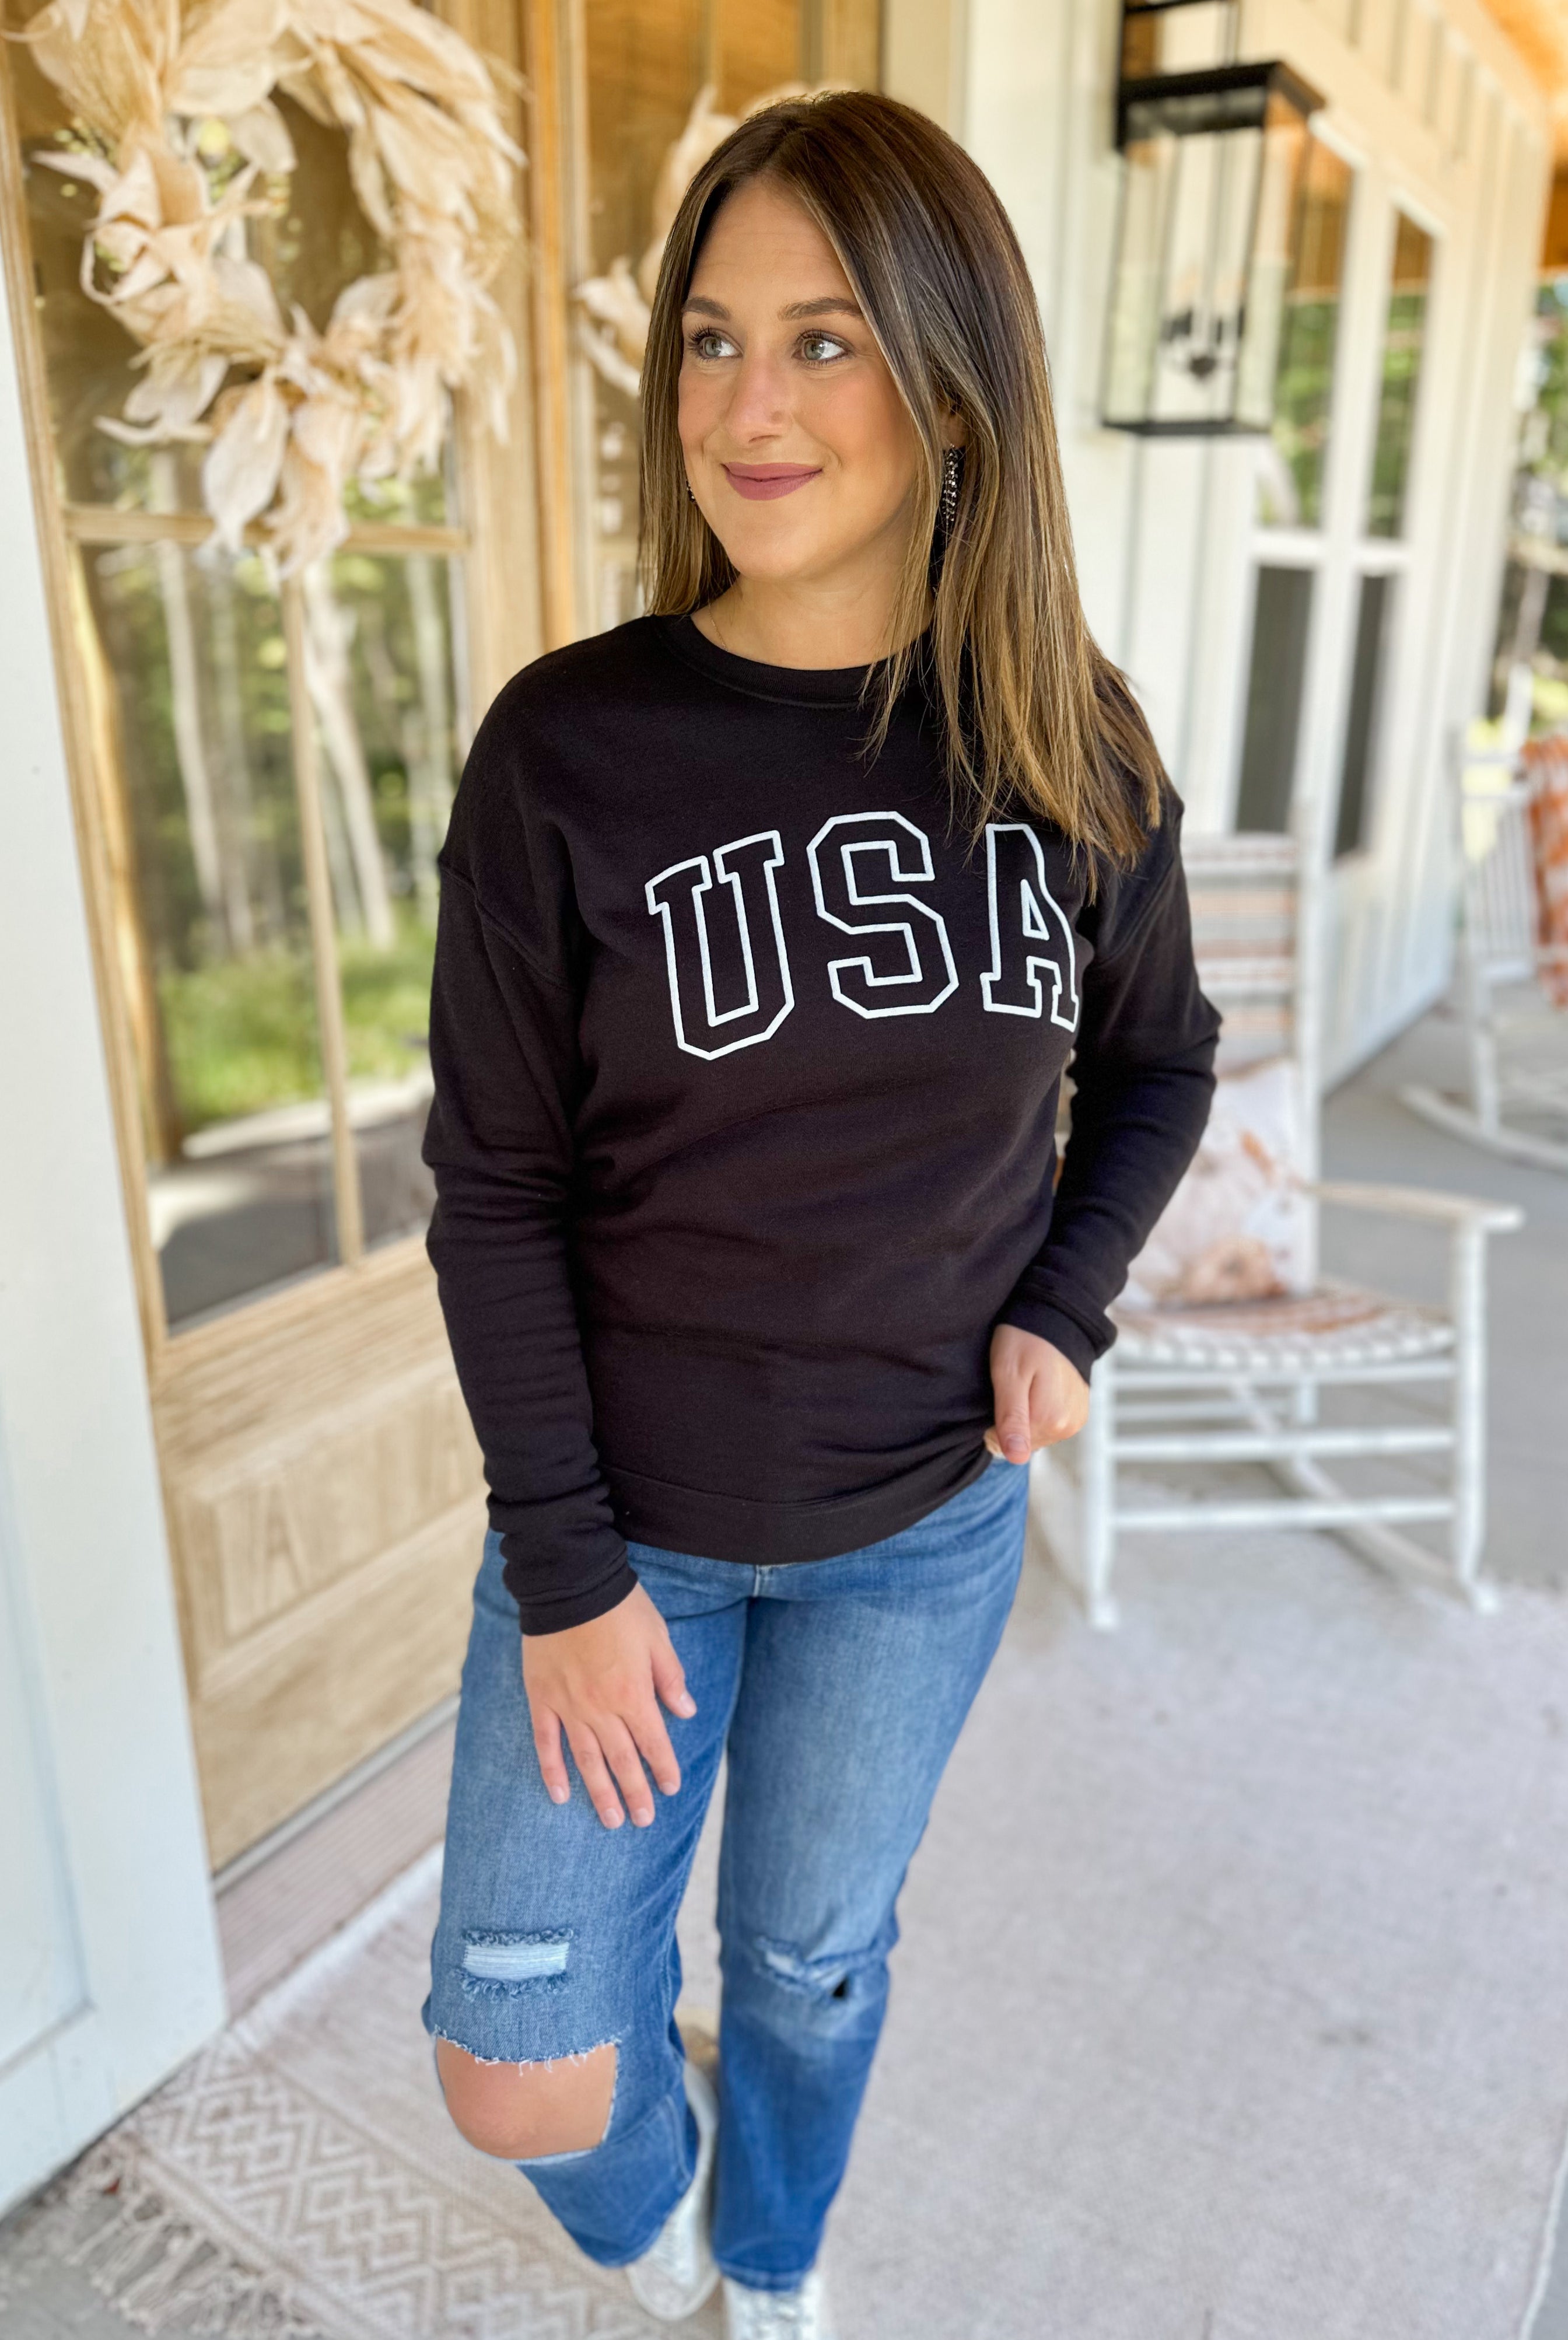 USA Puff Print Ever So Soft Long Sleeve Graphic Pullover Sweatshirt - Be You Boutique